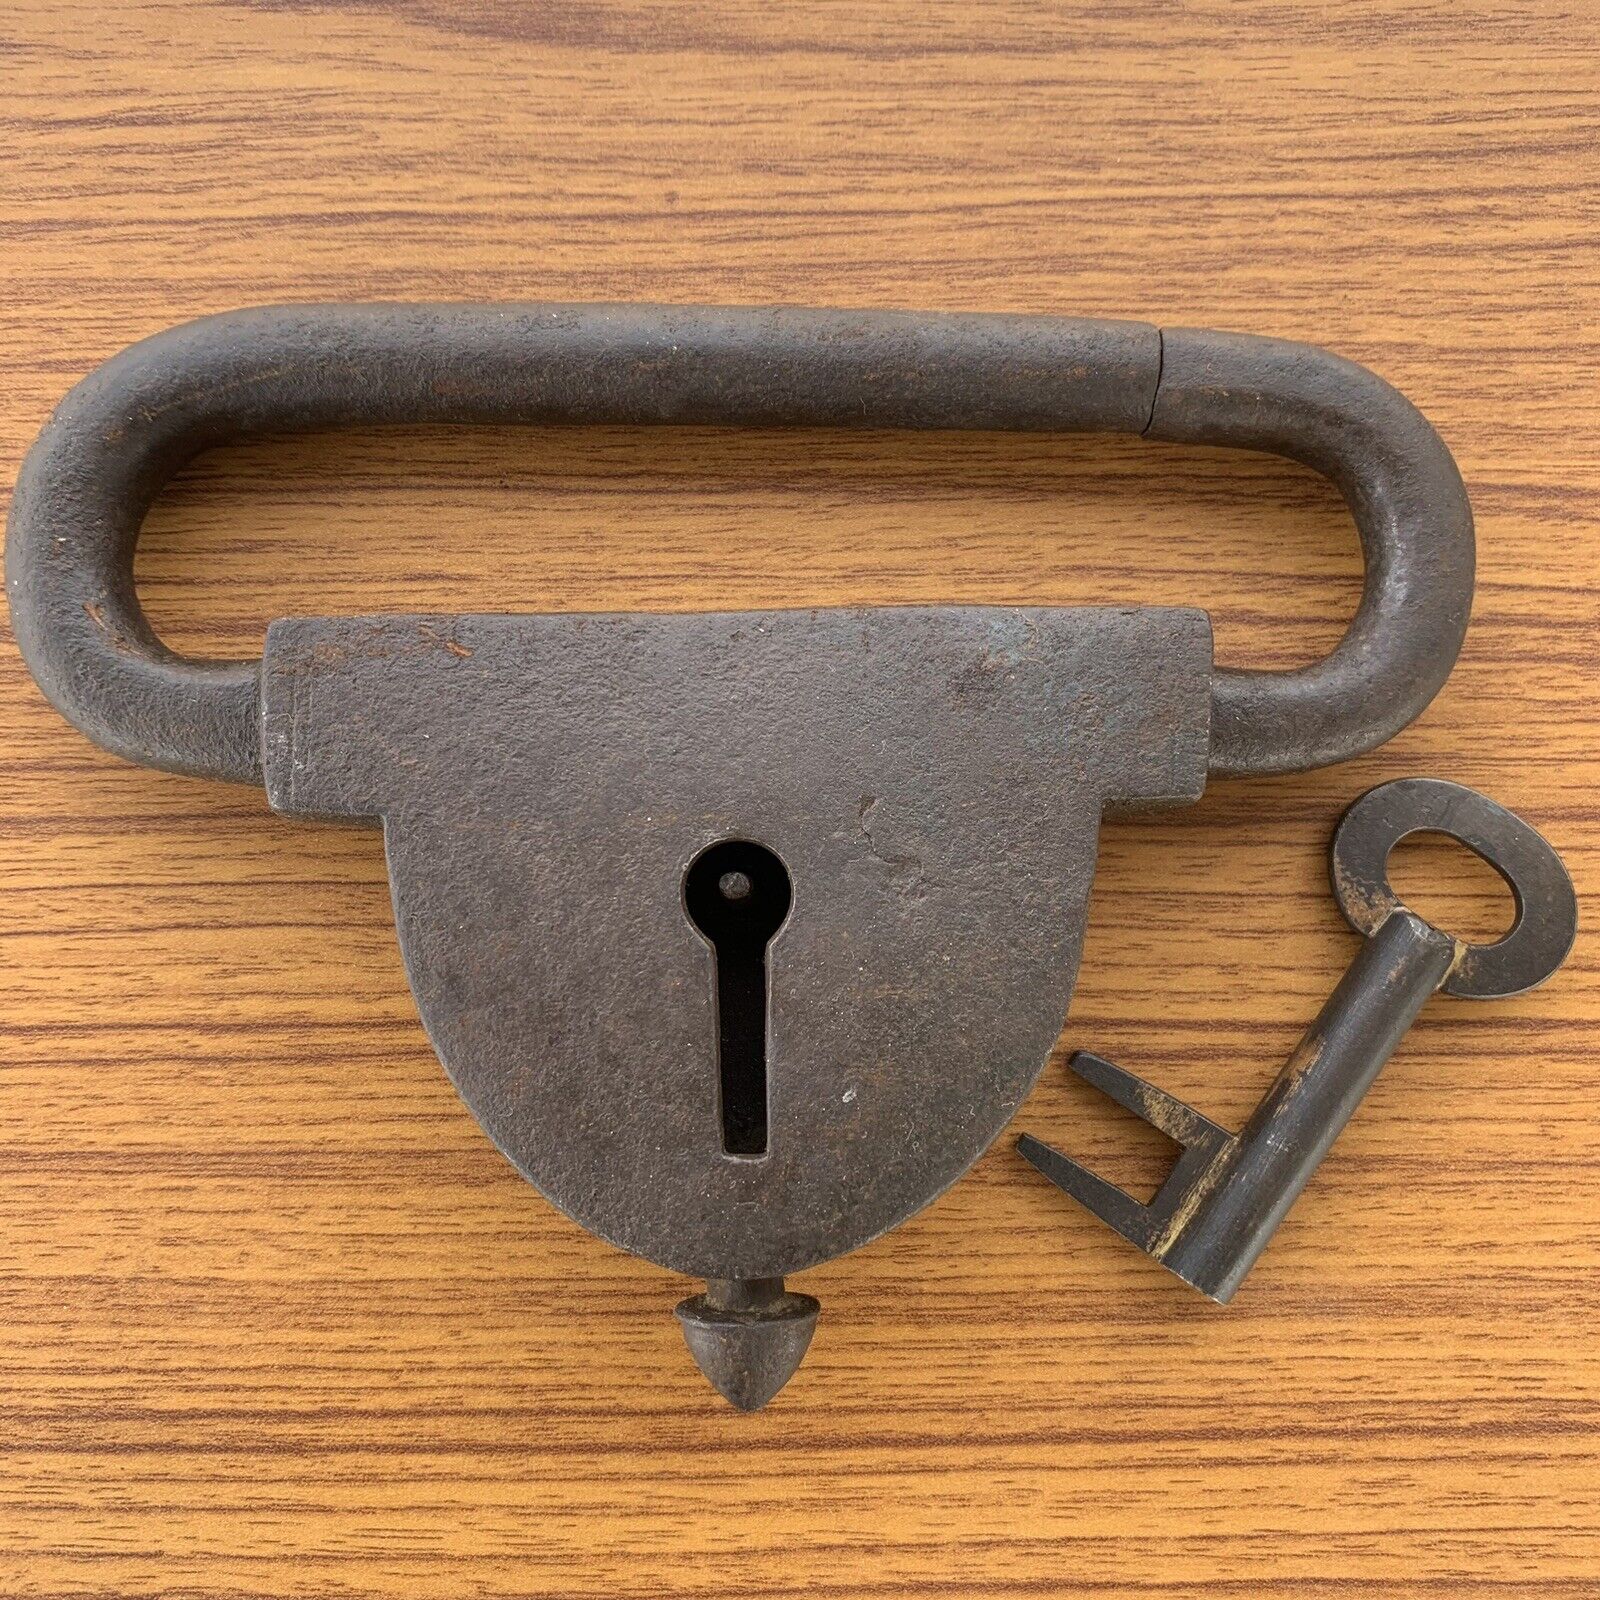 Early 18th C Iron padlock or lock with key BARBED SPRING, Old or antique.